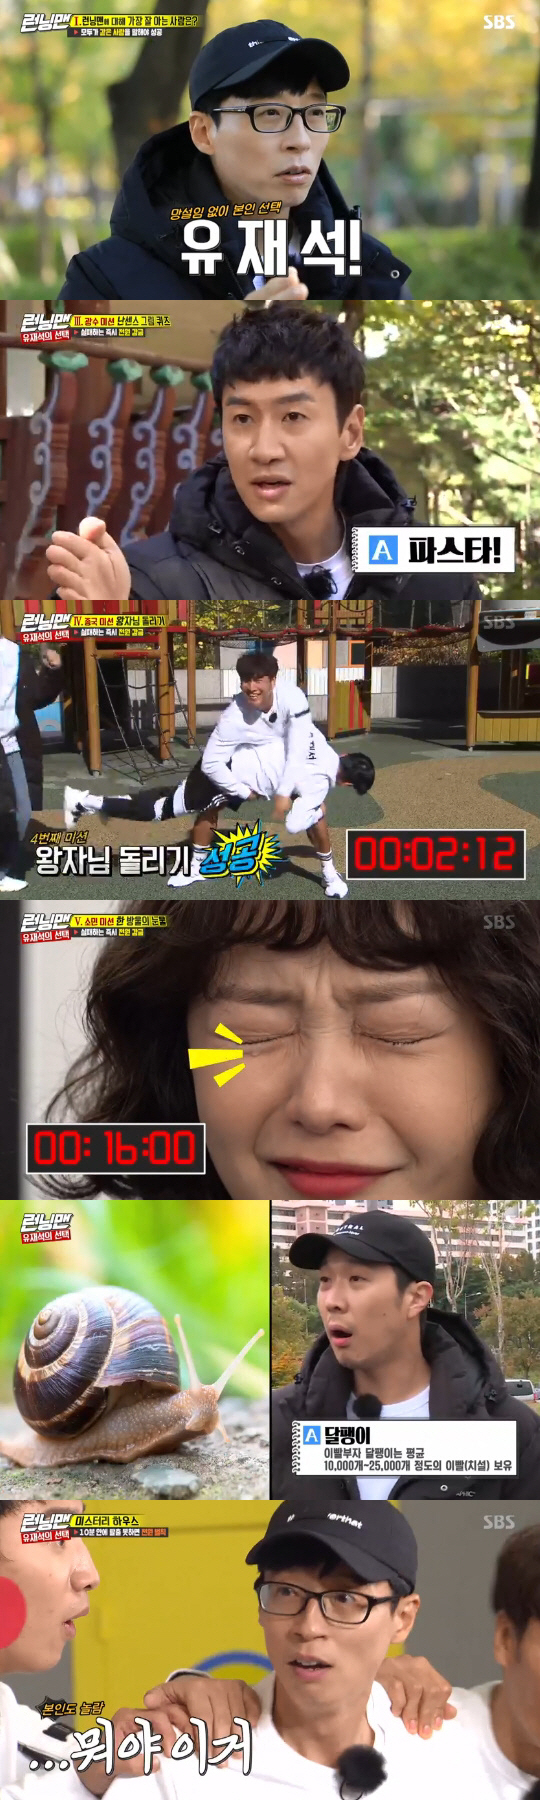 Running Man Kang Han-na and Seol In-ah played Kim Jong-guks Competition.On SBS Running Man broadcasted on the afternoon of the 18th, How much do you know Running Man race and teamwork of members can be seen?  Race was held.On this day, a knowing mate race was held with Kang Na, Seol In-ah, Red Velvet Irene and Joy.Couple selection was made by looking at the photos synthesized with the Running Man male members, and the members who saw the composite photos were shocked and shocked.In particular, Yang Se-chan was surprised to create a powerful visual in all synthetic photographs with a unique oral structure.First, I chose Yoo Jae-seok, but Kim Jong-guk, but the situation changed as Seol In-ah objected just before they became a couple.Seol In-ah actively appealed to Kim Jong-kook in the name of Sam-kuk, and finally the two became couples.Yoo Jae-seok, who had been abandoned by Kang Han-na (?), chose Seol In-ah immediately, but Seol In-ah chose Kim Jong-guk and quickly transferred to Irene again.Joey said, I know Yoo Jae-seoks weakness 10 years ago. I have only seen his brother.Lee Kwang-soo, who chose Joey, was angry with the photo, and Joey refused, saying, Lee Kwang-soo has a feeling like an ex-boyfriend.Yoo Jae-seok wondered about his weaknesses in Joeys remarks, but the contents of the weaknesses that Joey threatened 10 years ago were that Yoo Jae-seok was a pimple (?).Yoo Jae-seok said, It is not a secret.On this day, the members boasted of their teamwork in the race, How much do you know Running Man? The first members were Who is the best member of Running Man members?All eight members had to answer the same person to succeed in the Mission, seven members chose Yoo Jae-seok.Yoo Jae-seoks choice focused attention on all the members, with Yoo Jae-seok unanimously selected. Yoo Jae-seok chose himself after his troubles, and the first Mission was easily successful.Yoo Jae-seok, who was selected as the best acquaintance of the members, chose the member who seemed to do the best of the Missions given by the production team as the Mission runner.If one member fails, all members will be dragged to the final pRace and trapped, and if they can not escape within the time limit, they will be punished.Yoo Jae-seok carefully chose the members. When the first ticketing came out, Yoo Jae-seok chose Ji Seok-jin for his career and succeeded in the Mission easily.In the Nansense Grimm Quiz, Lee Kwang-soo was selected and succeeded in succession. In the Prince Turning Mission, he chose Kim Jong-guk without hesitation.Kim Jong-kook was surprised to succeed with two seconds left. In the Mission where tears were shed within 30 seconds, Jeon So-min was able to shed tears in 14 seconds.Yang Se-chan also succeeded in the character quiz, and the members continued to live up to the power of the death, but Haha failed in the common sense quiz, and the members were trapped in the final pRace.At the final venue, the members carried out shoe throws and dart Missions to escape after lighting the name tags of Song Ji Hyo and Haha who did not succeed in the Mission.The members who succeeded in the shoe throwing Mission first failed in the high-level dart Mission.Yoo Jae-seok came out in anxiety, and succeeded in the Mission like a miracle and decorated the first and end with glamorousness.